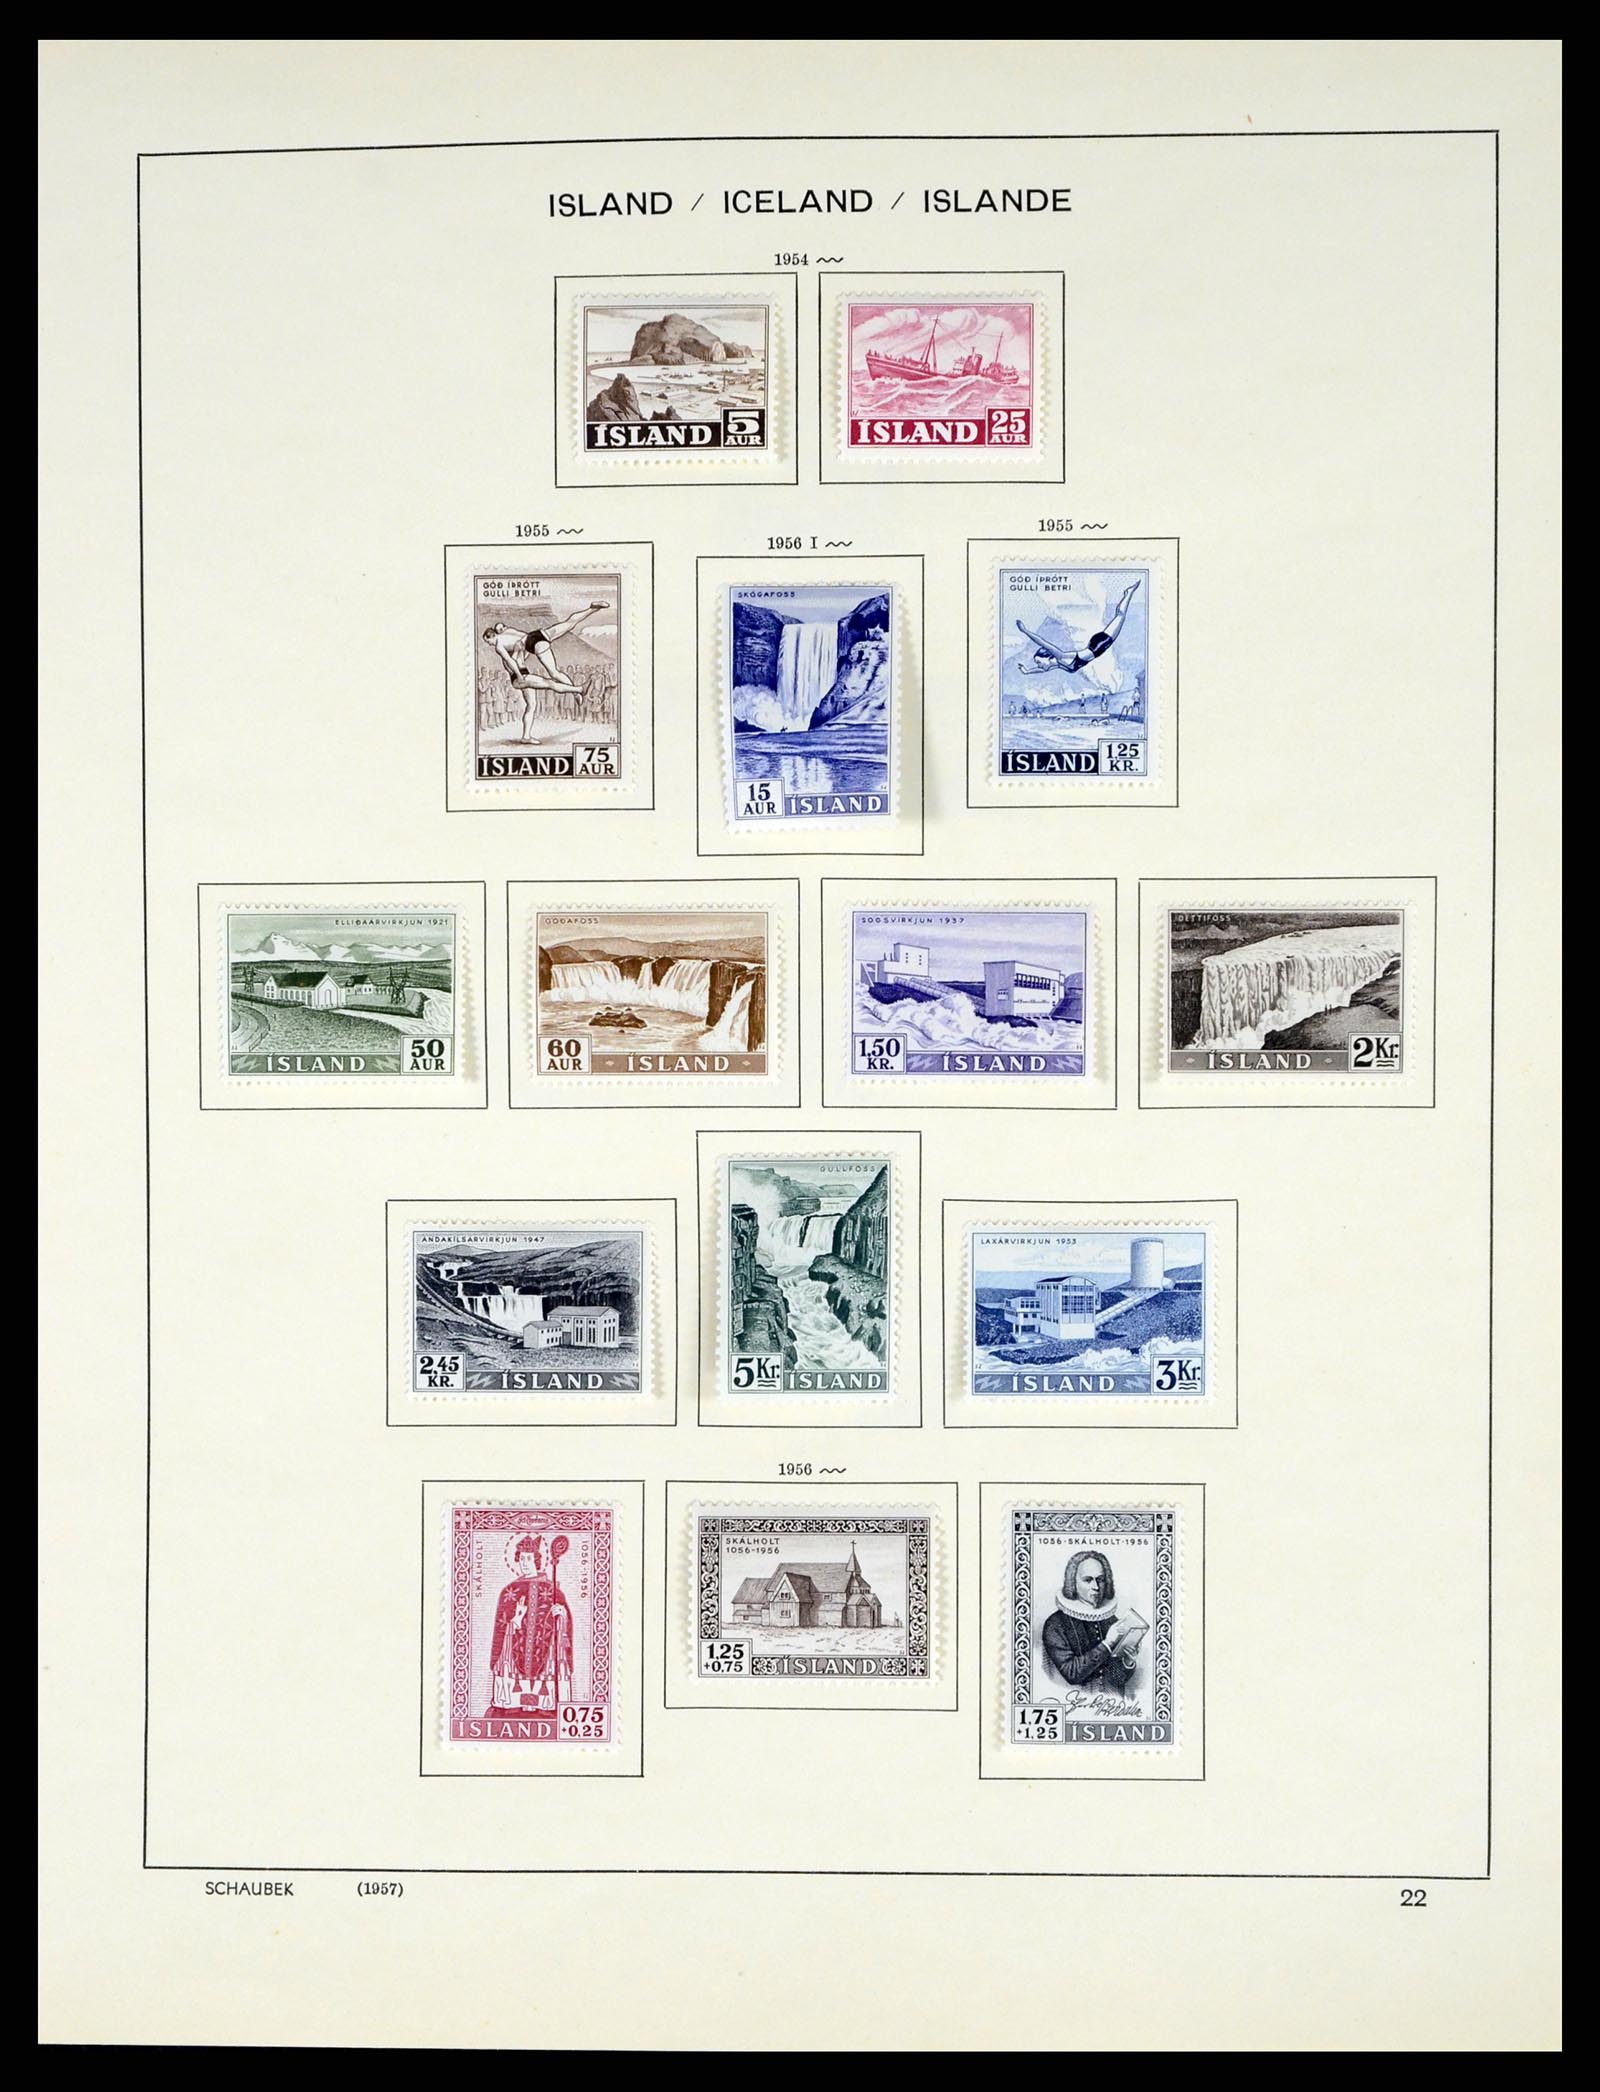 37555 023 - Stamp collection 37555 Iceland 1873-2010.